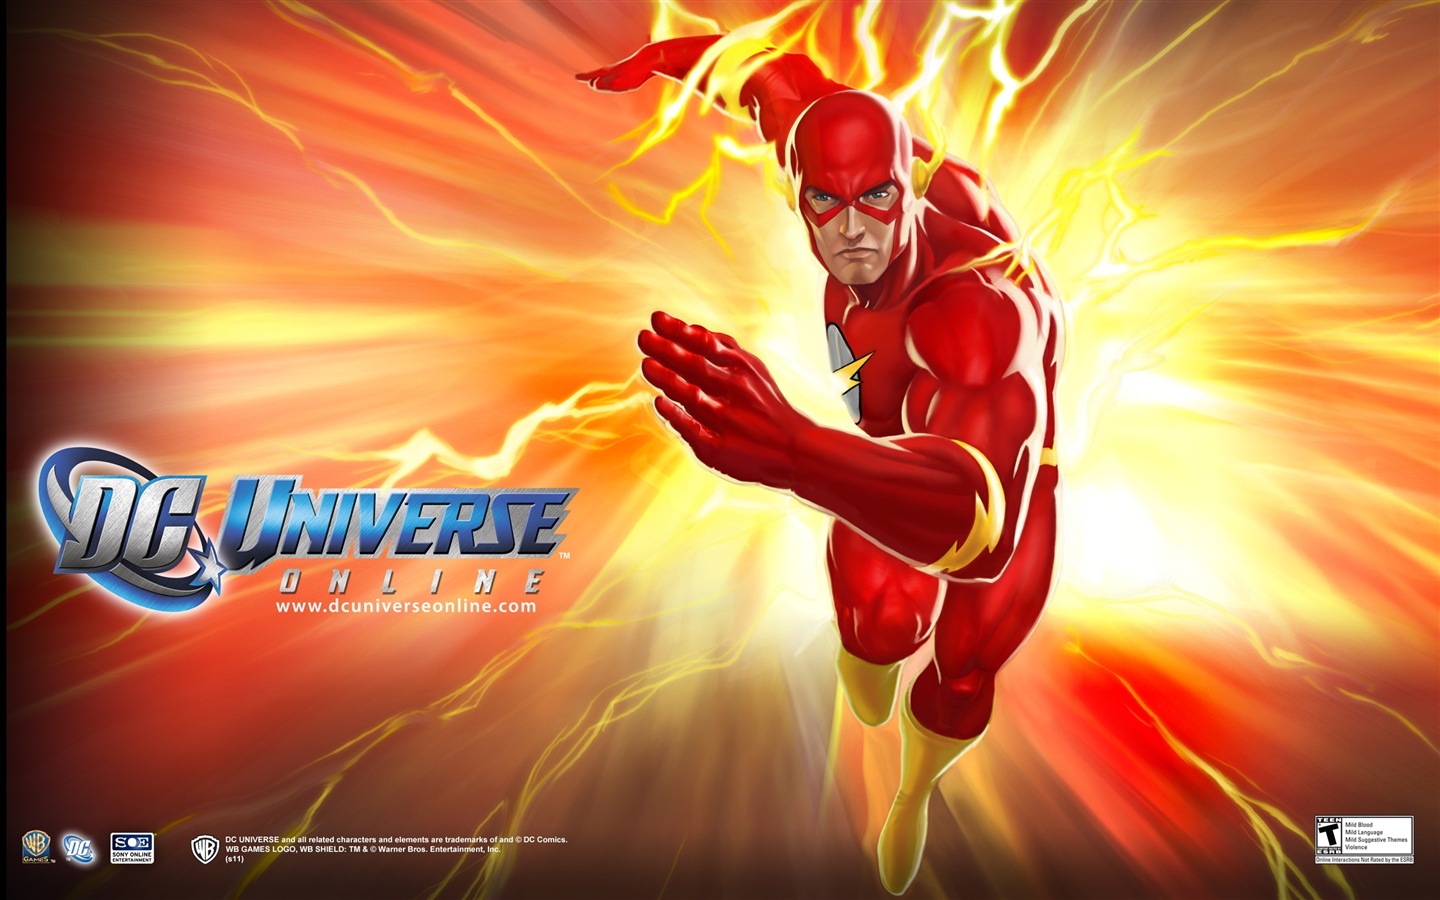 DC Universe Online HD game wallpapers #16 - 1440x900